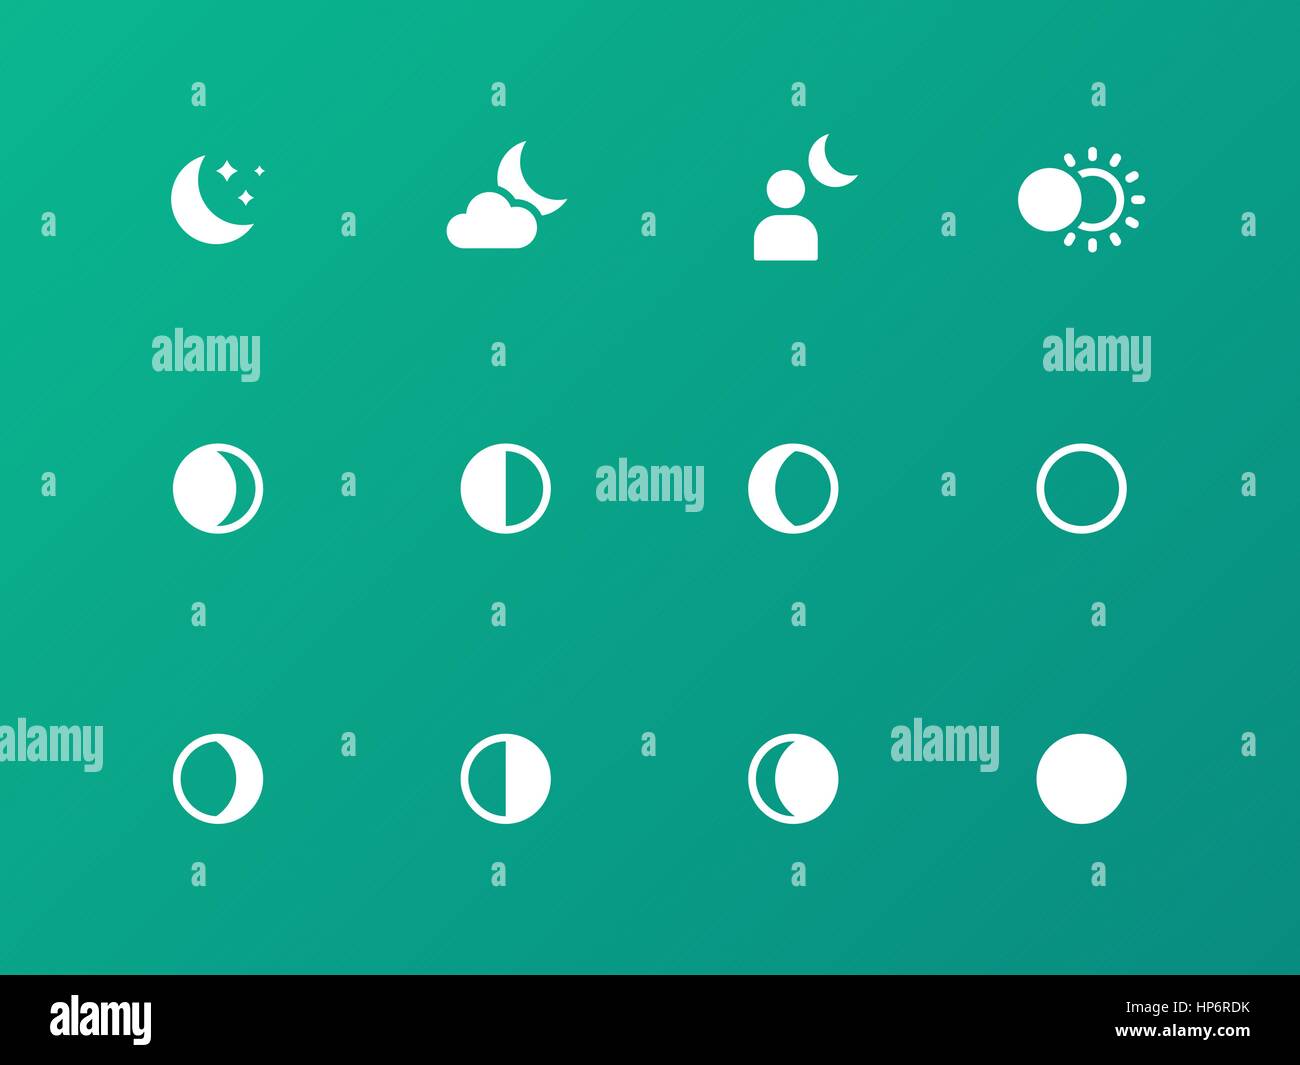 Seamless moon phase icons on green background. Stock Vector